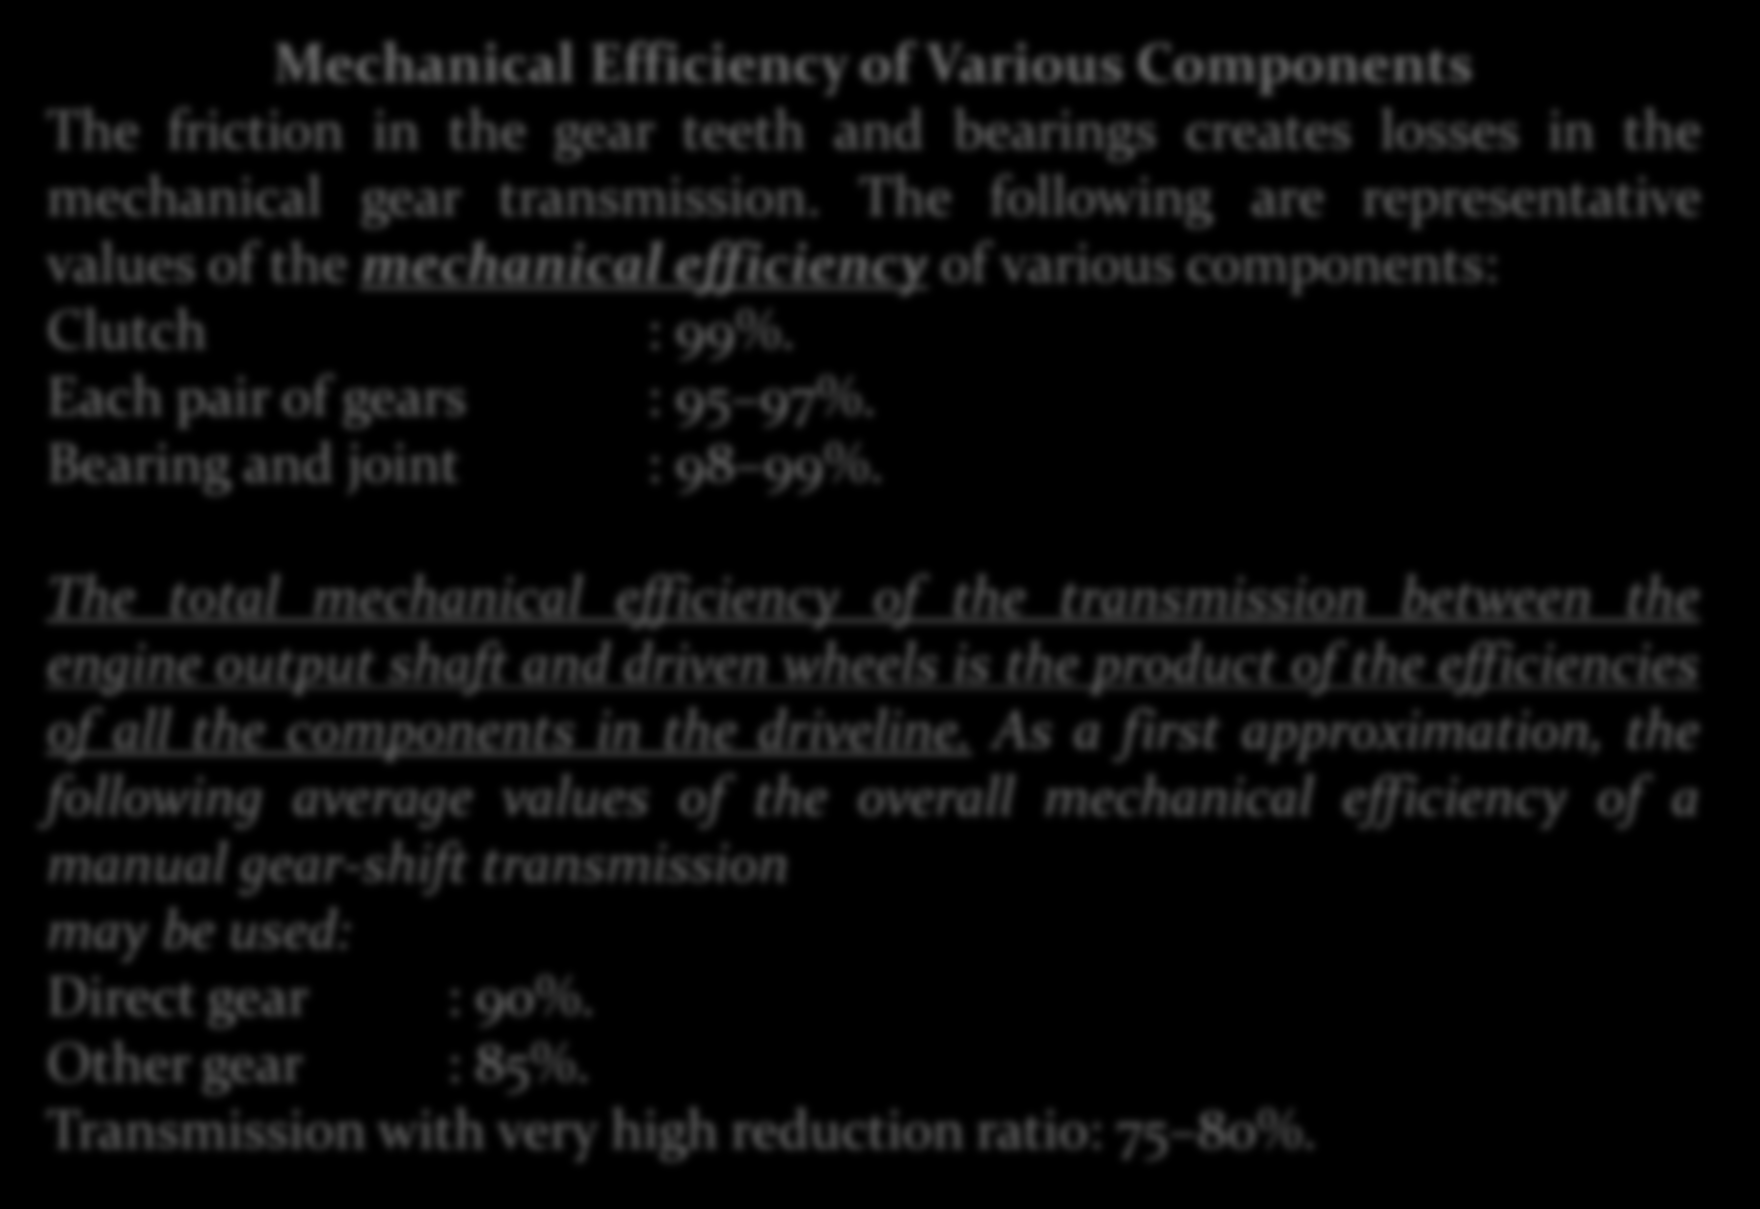 Mechanical Efficiency of Various Components The friction in the gear teeth and bearings creates losses in the mechanical gear transmission.